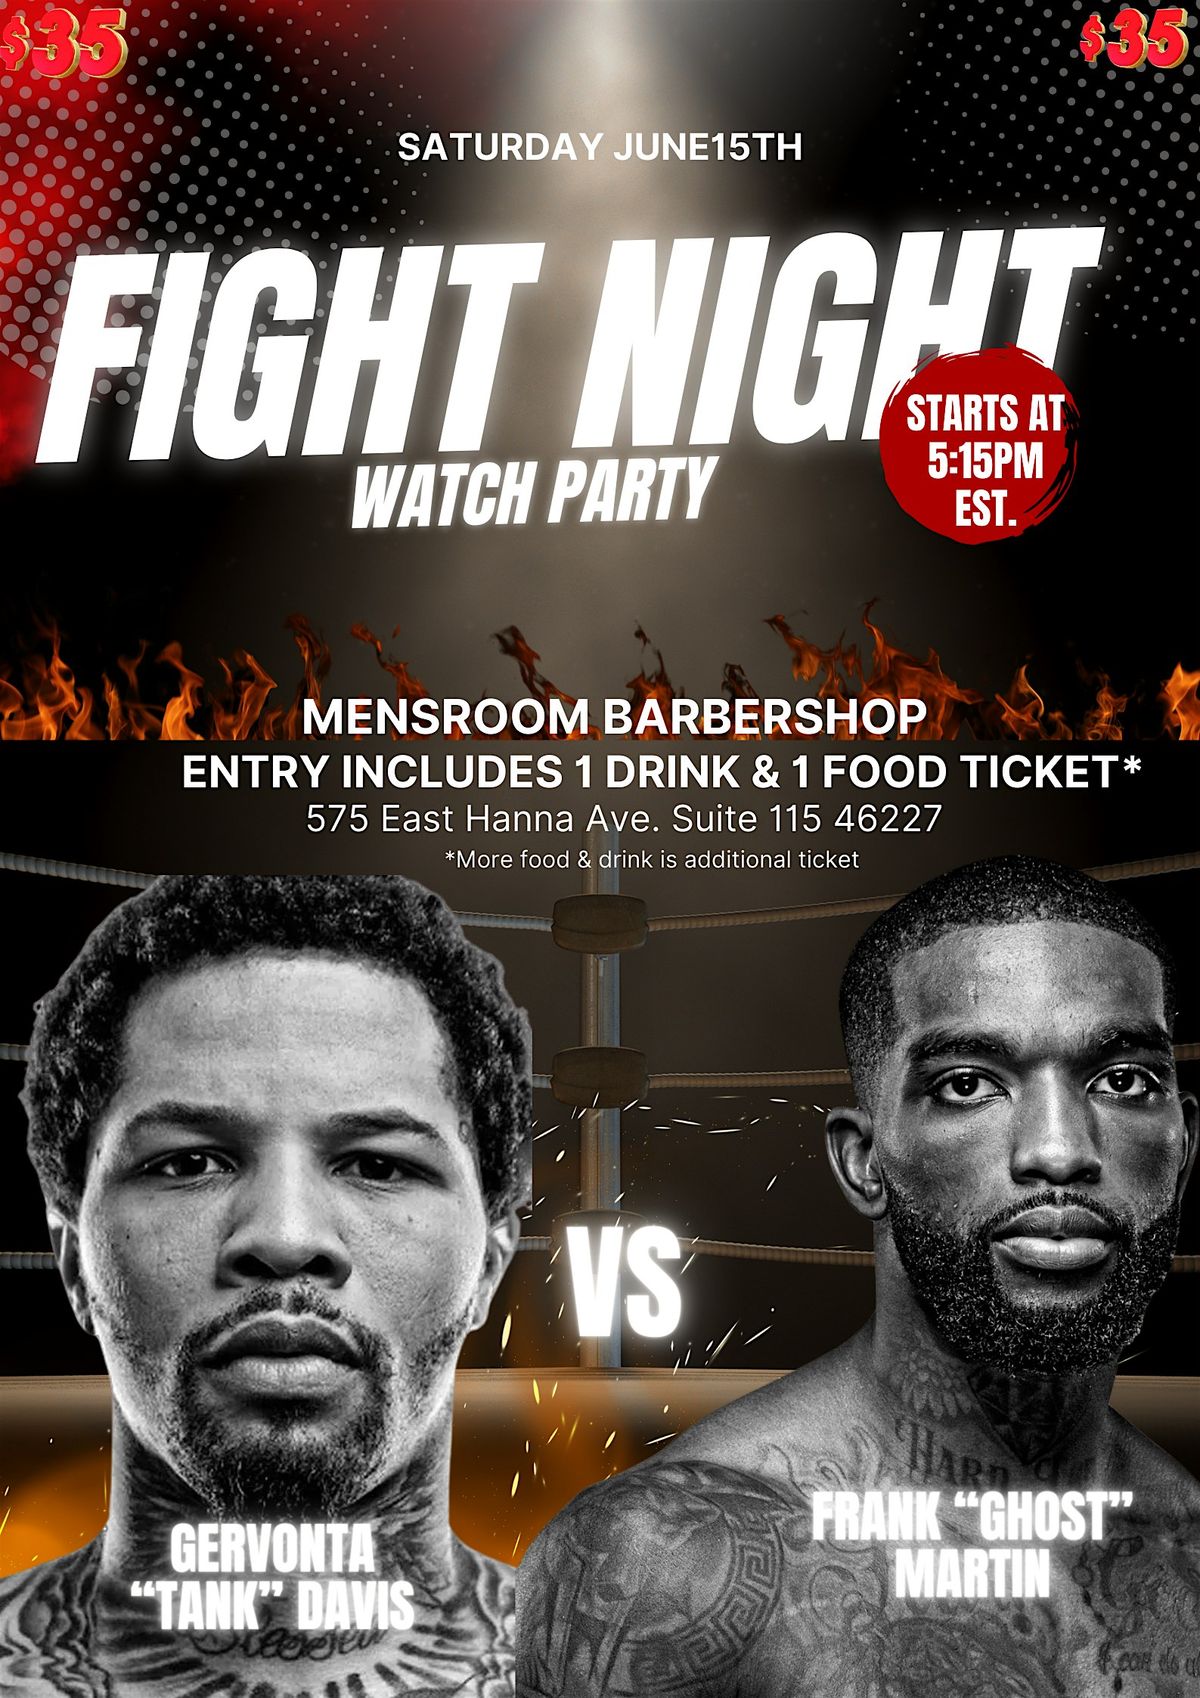 Mensroom Barbershop Presents: Fight Night Watch Party